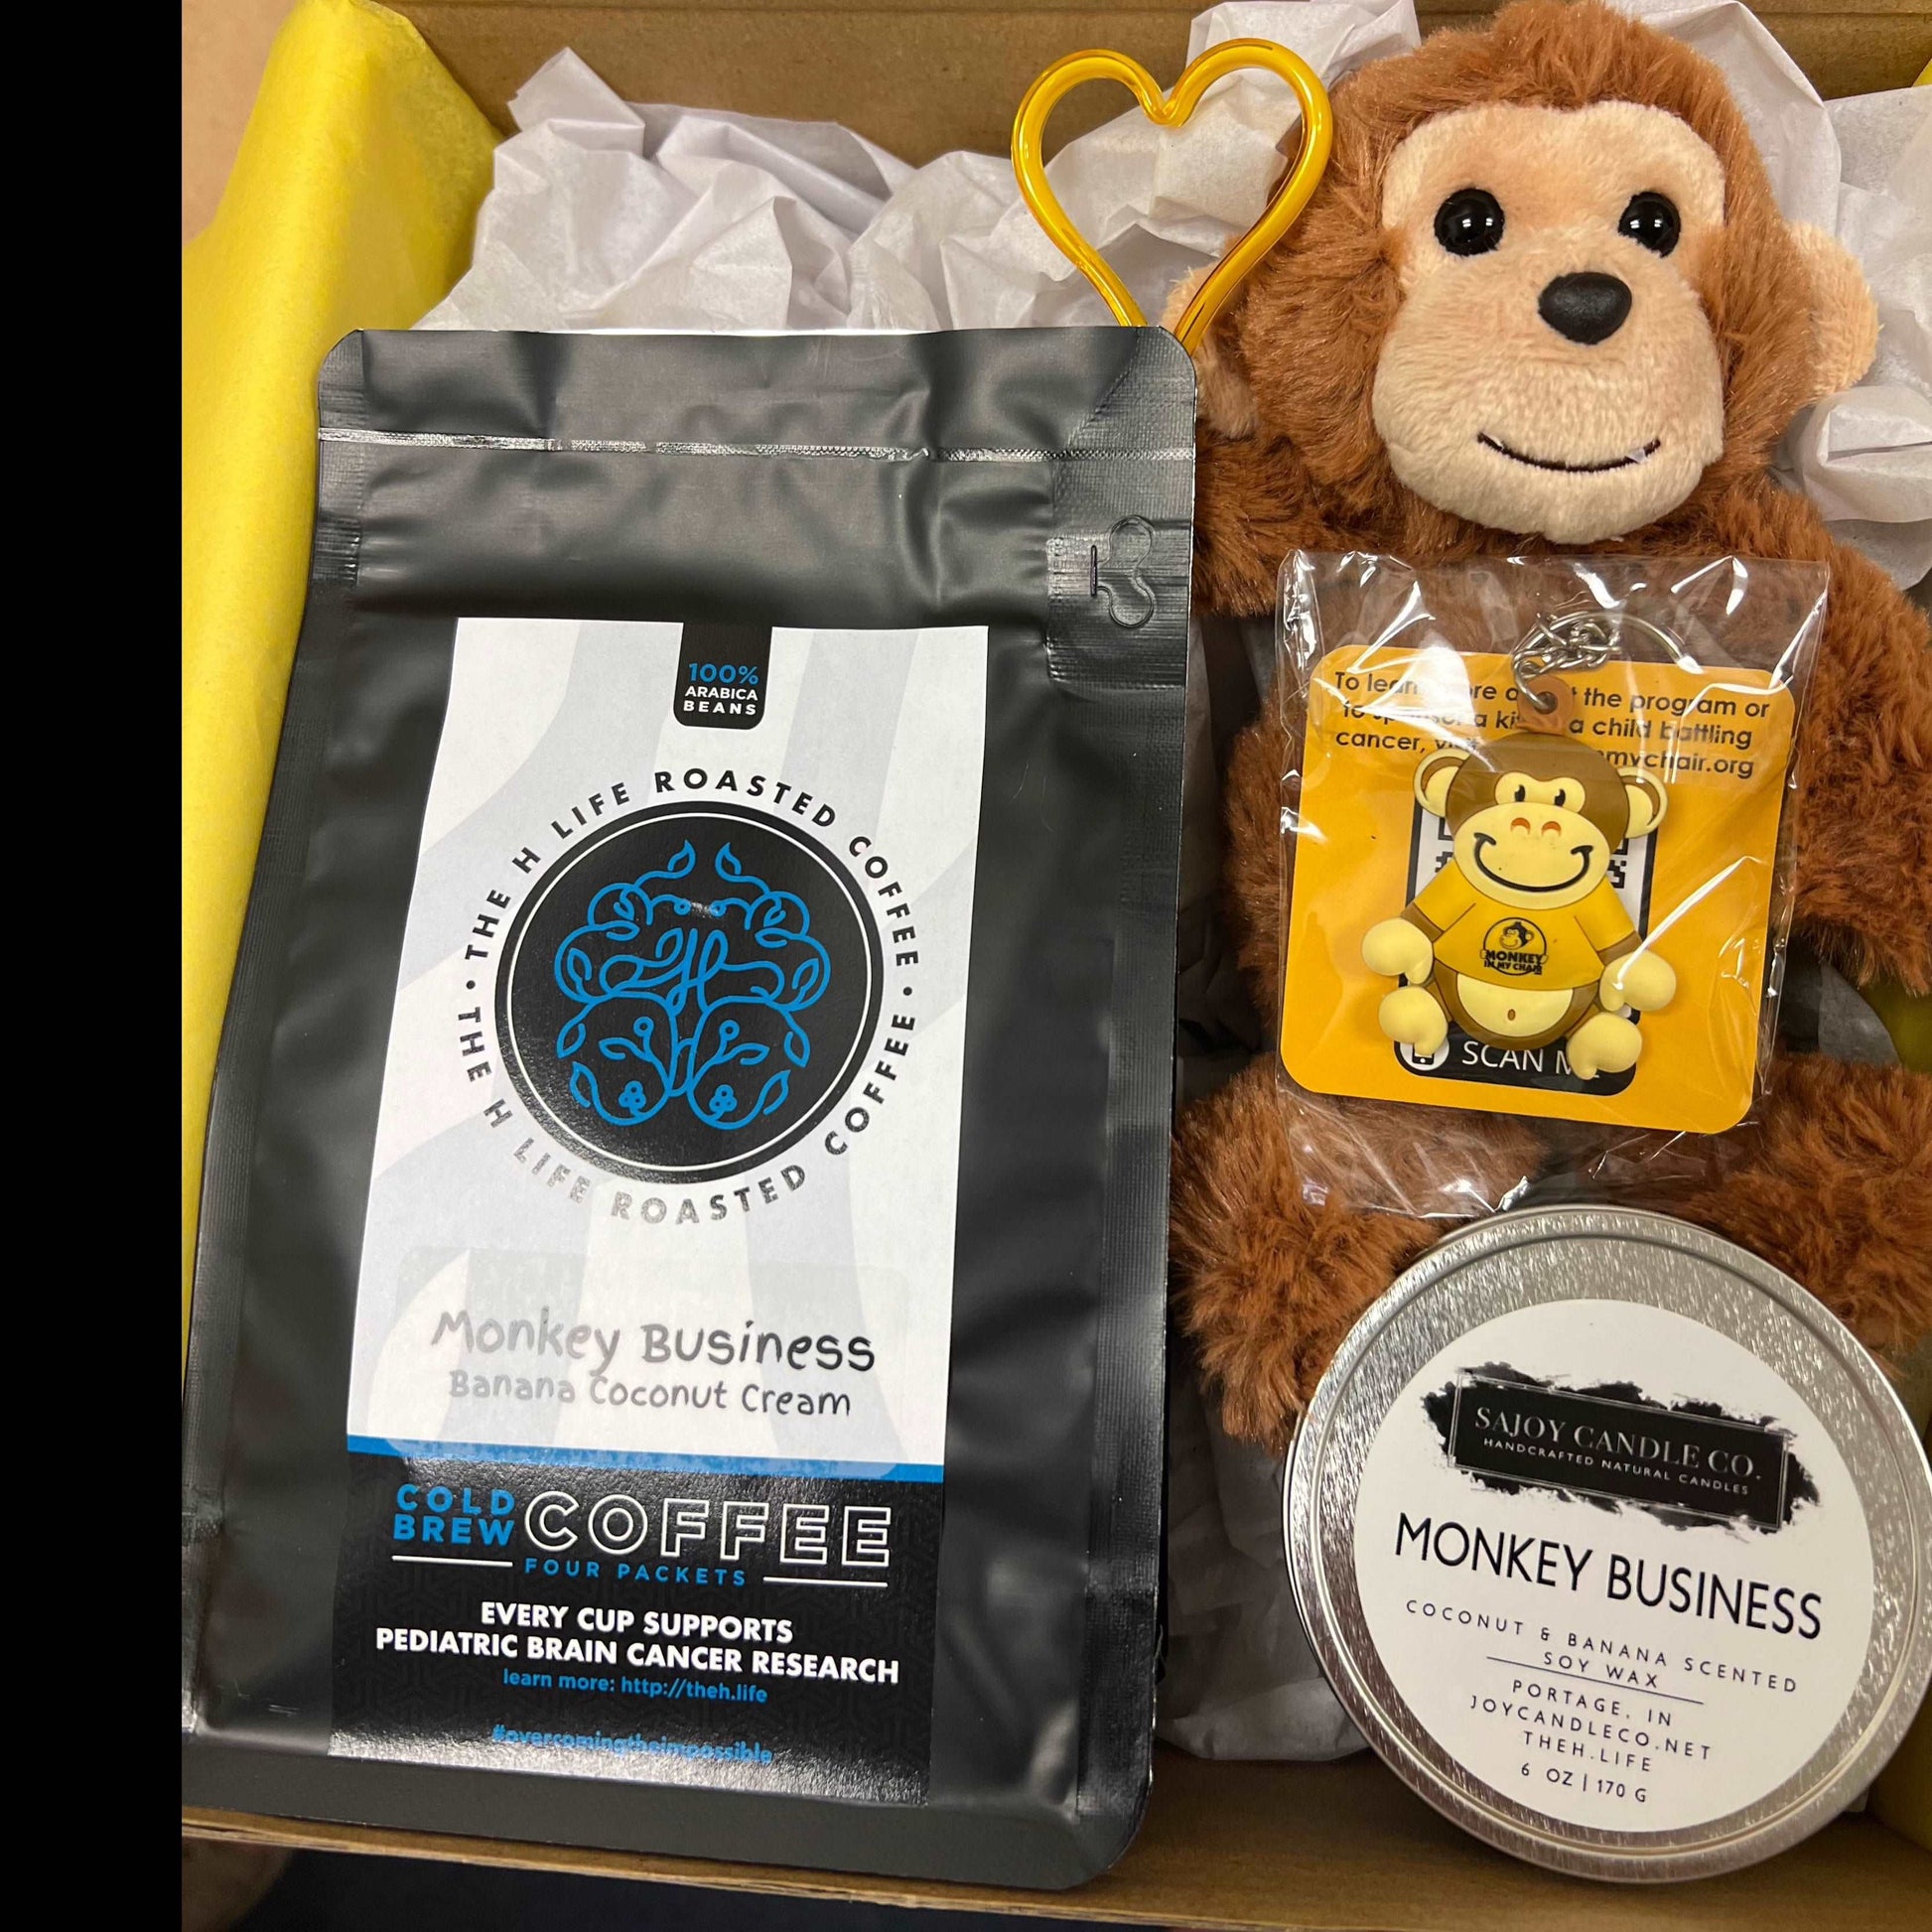 Boxes of Hope: Monkey Business